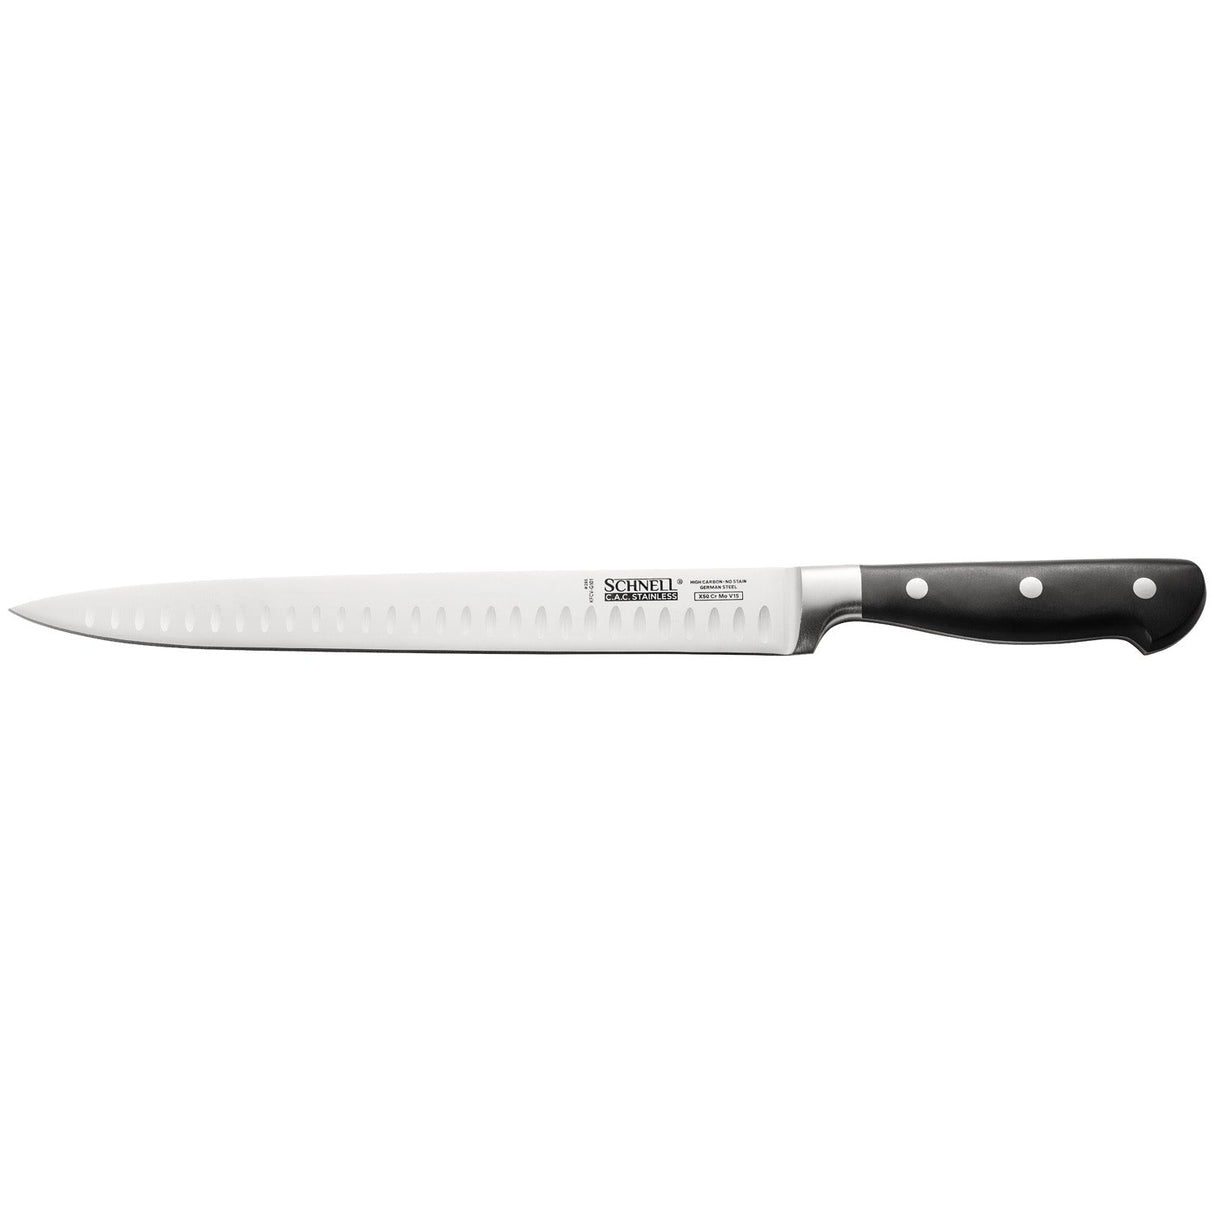 Schnell Carving Knife 10", Granton Edge